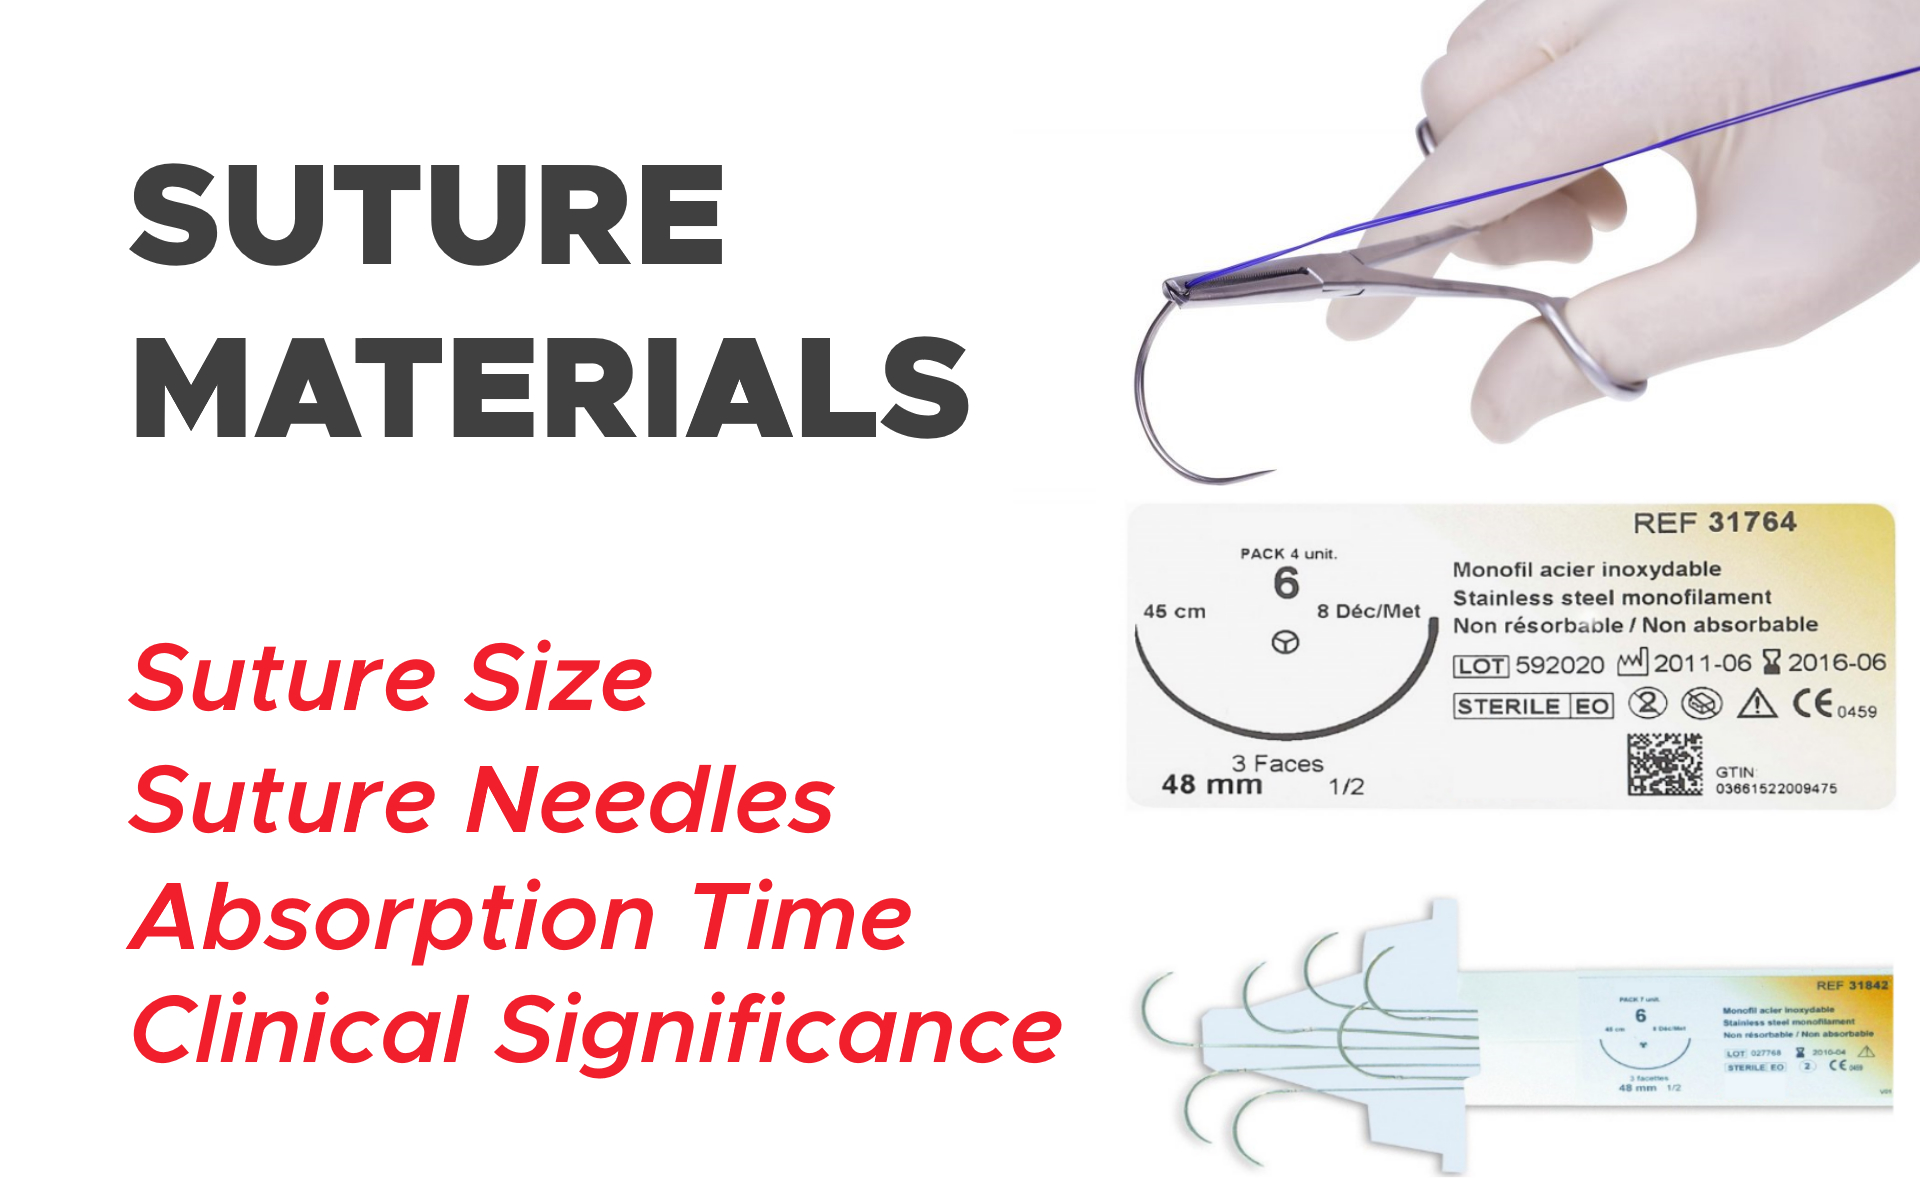 Suture Materials: Suture Size, Absorption Time, Suture Needles and Clinical Significance